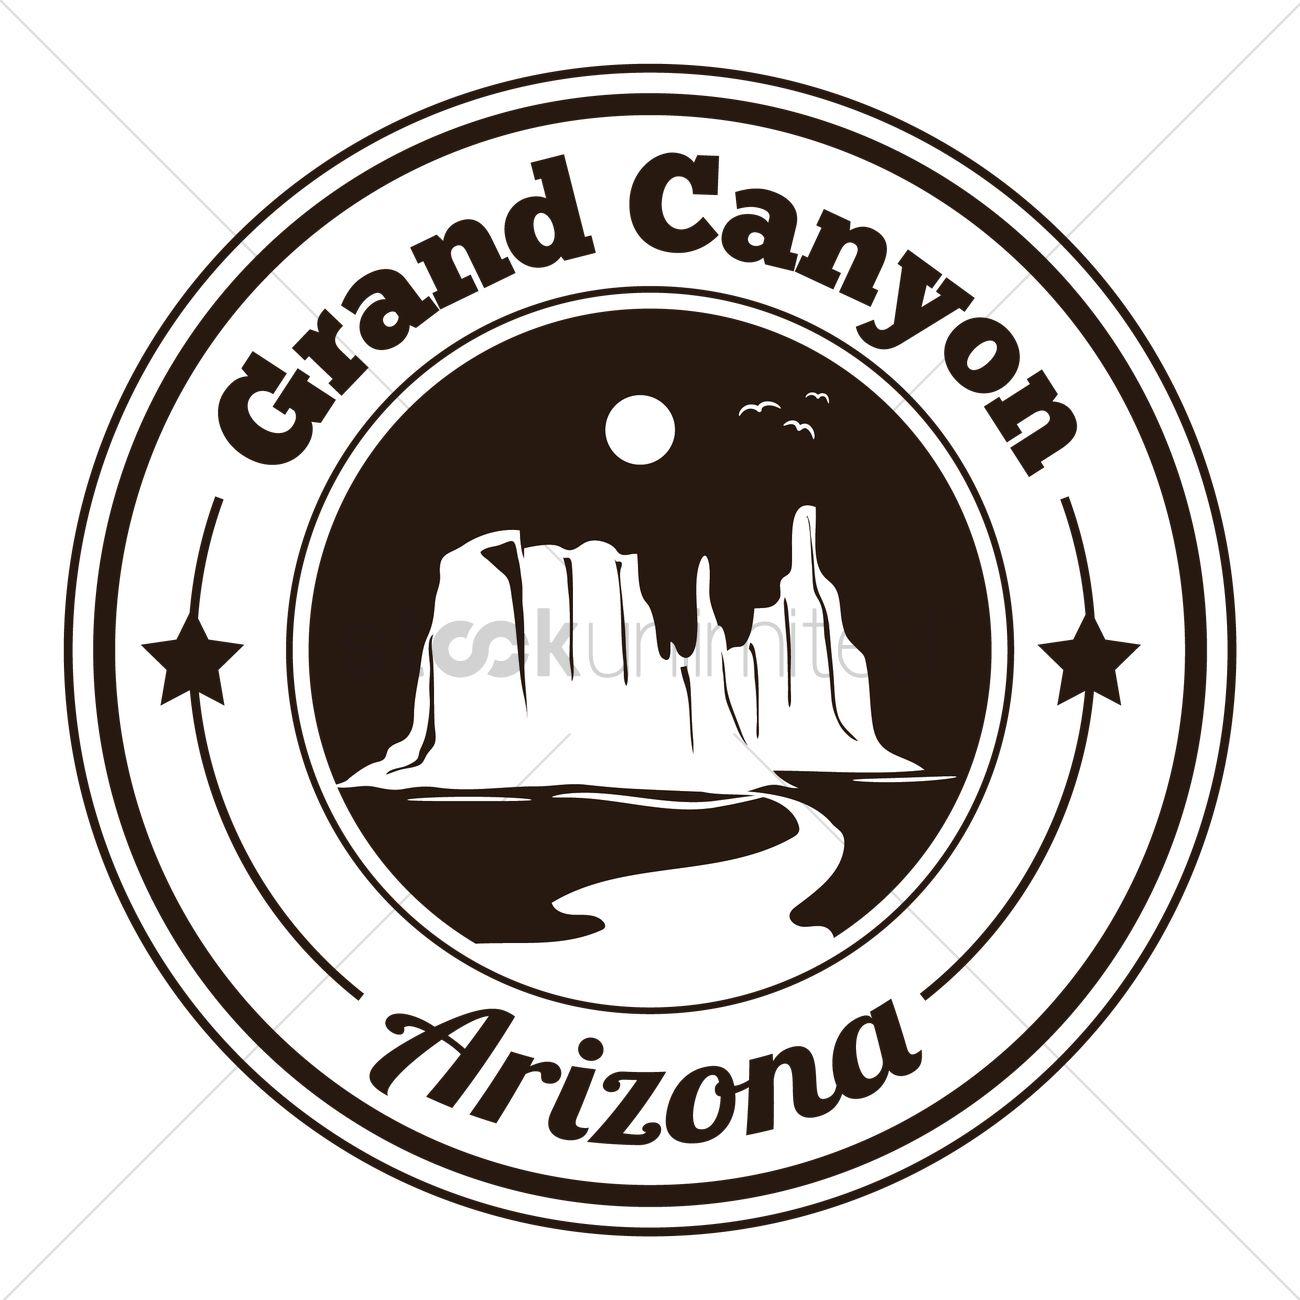 Grand Canyon State Logo - All about Grand Canyon State Logo Signs